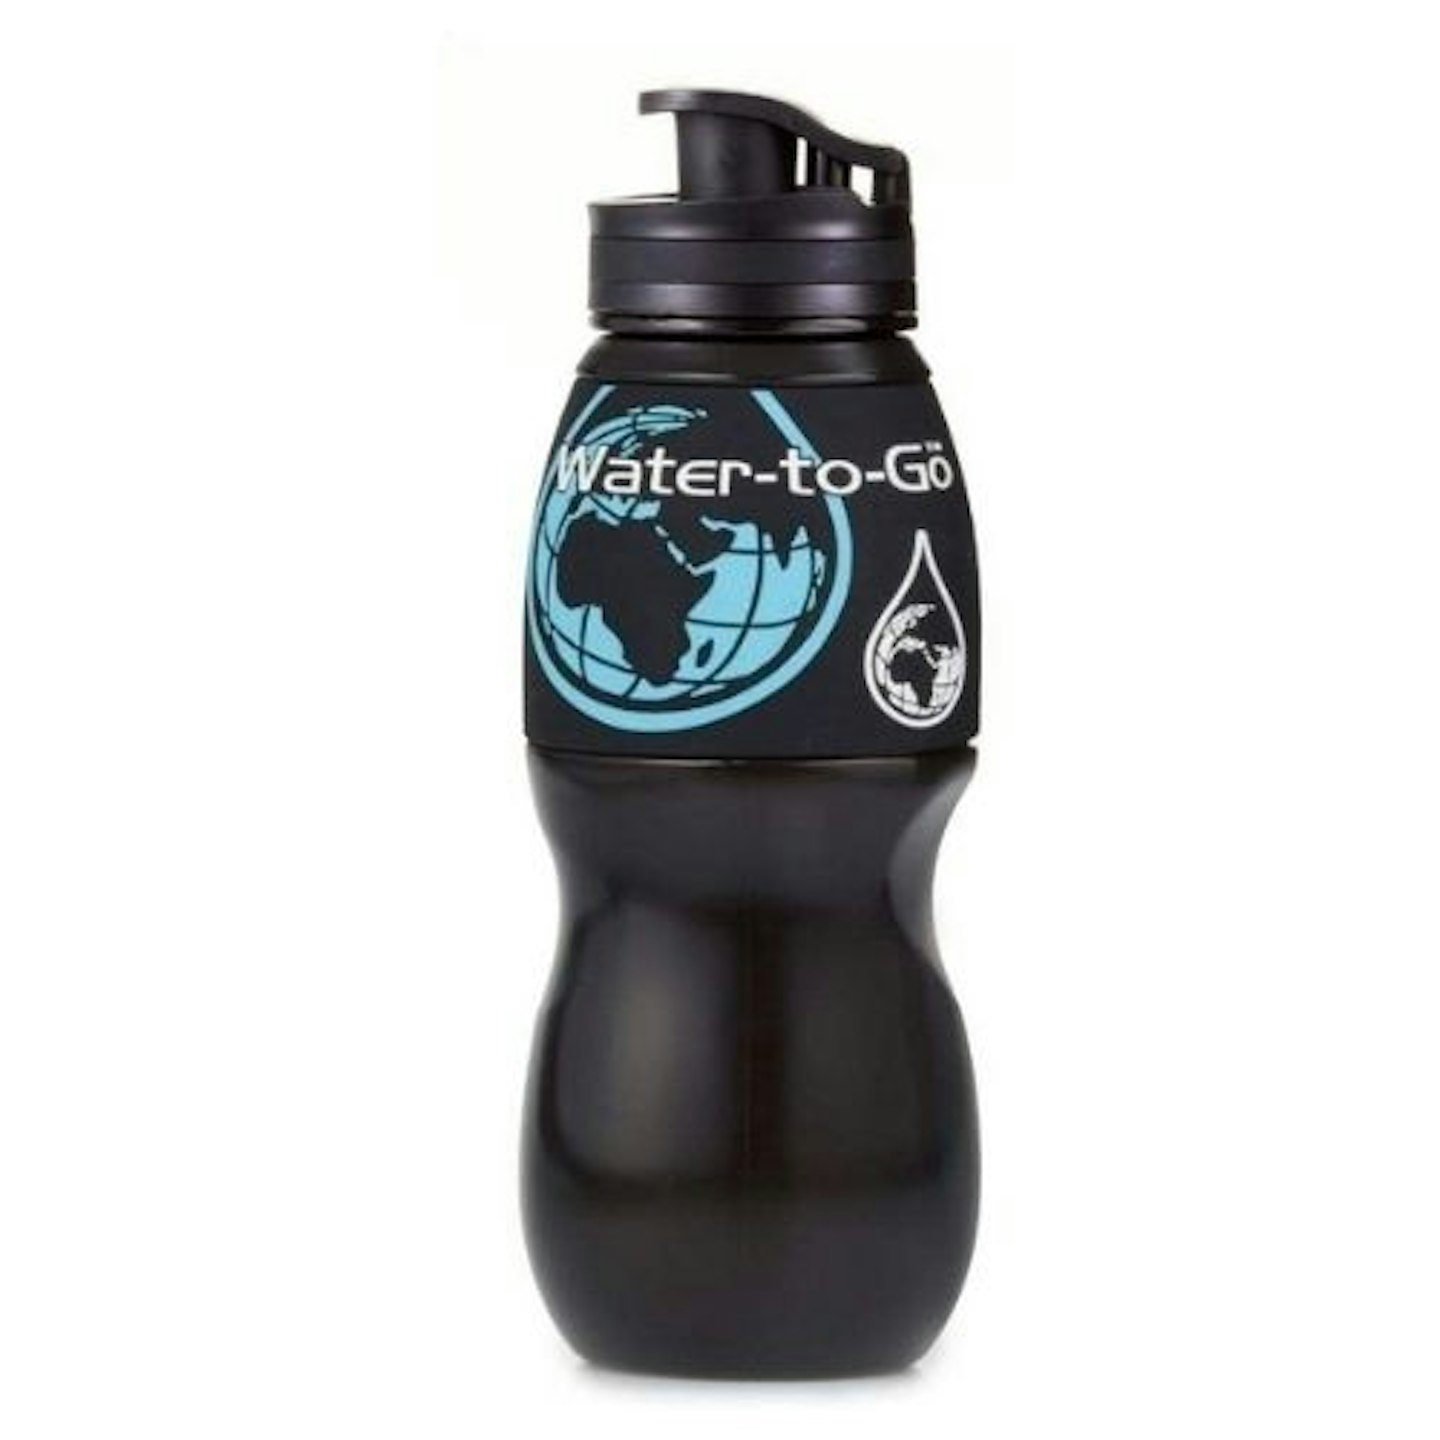 WATER TO GO Guaranteed Leakproof Filter Water Bottle